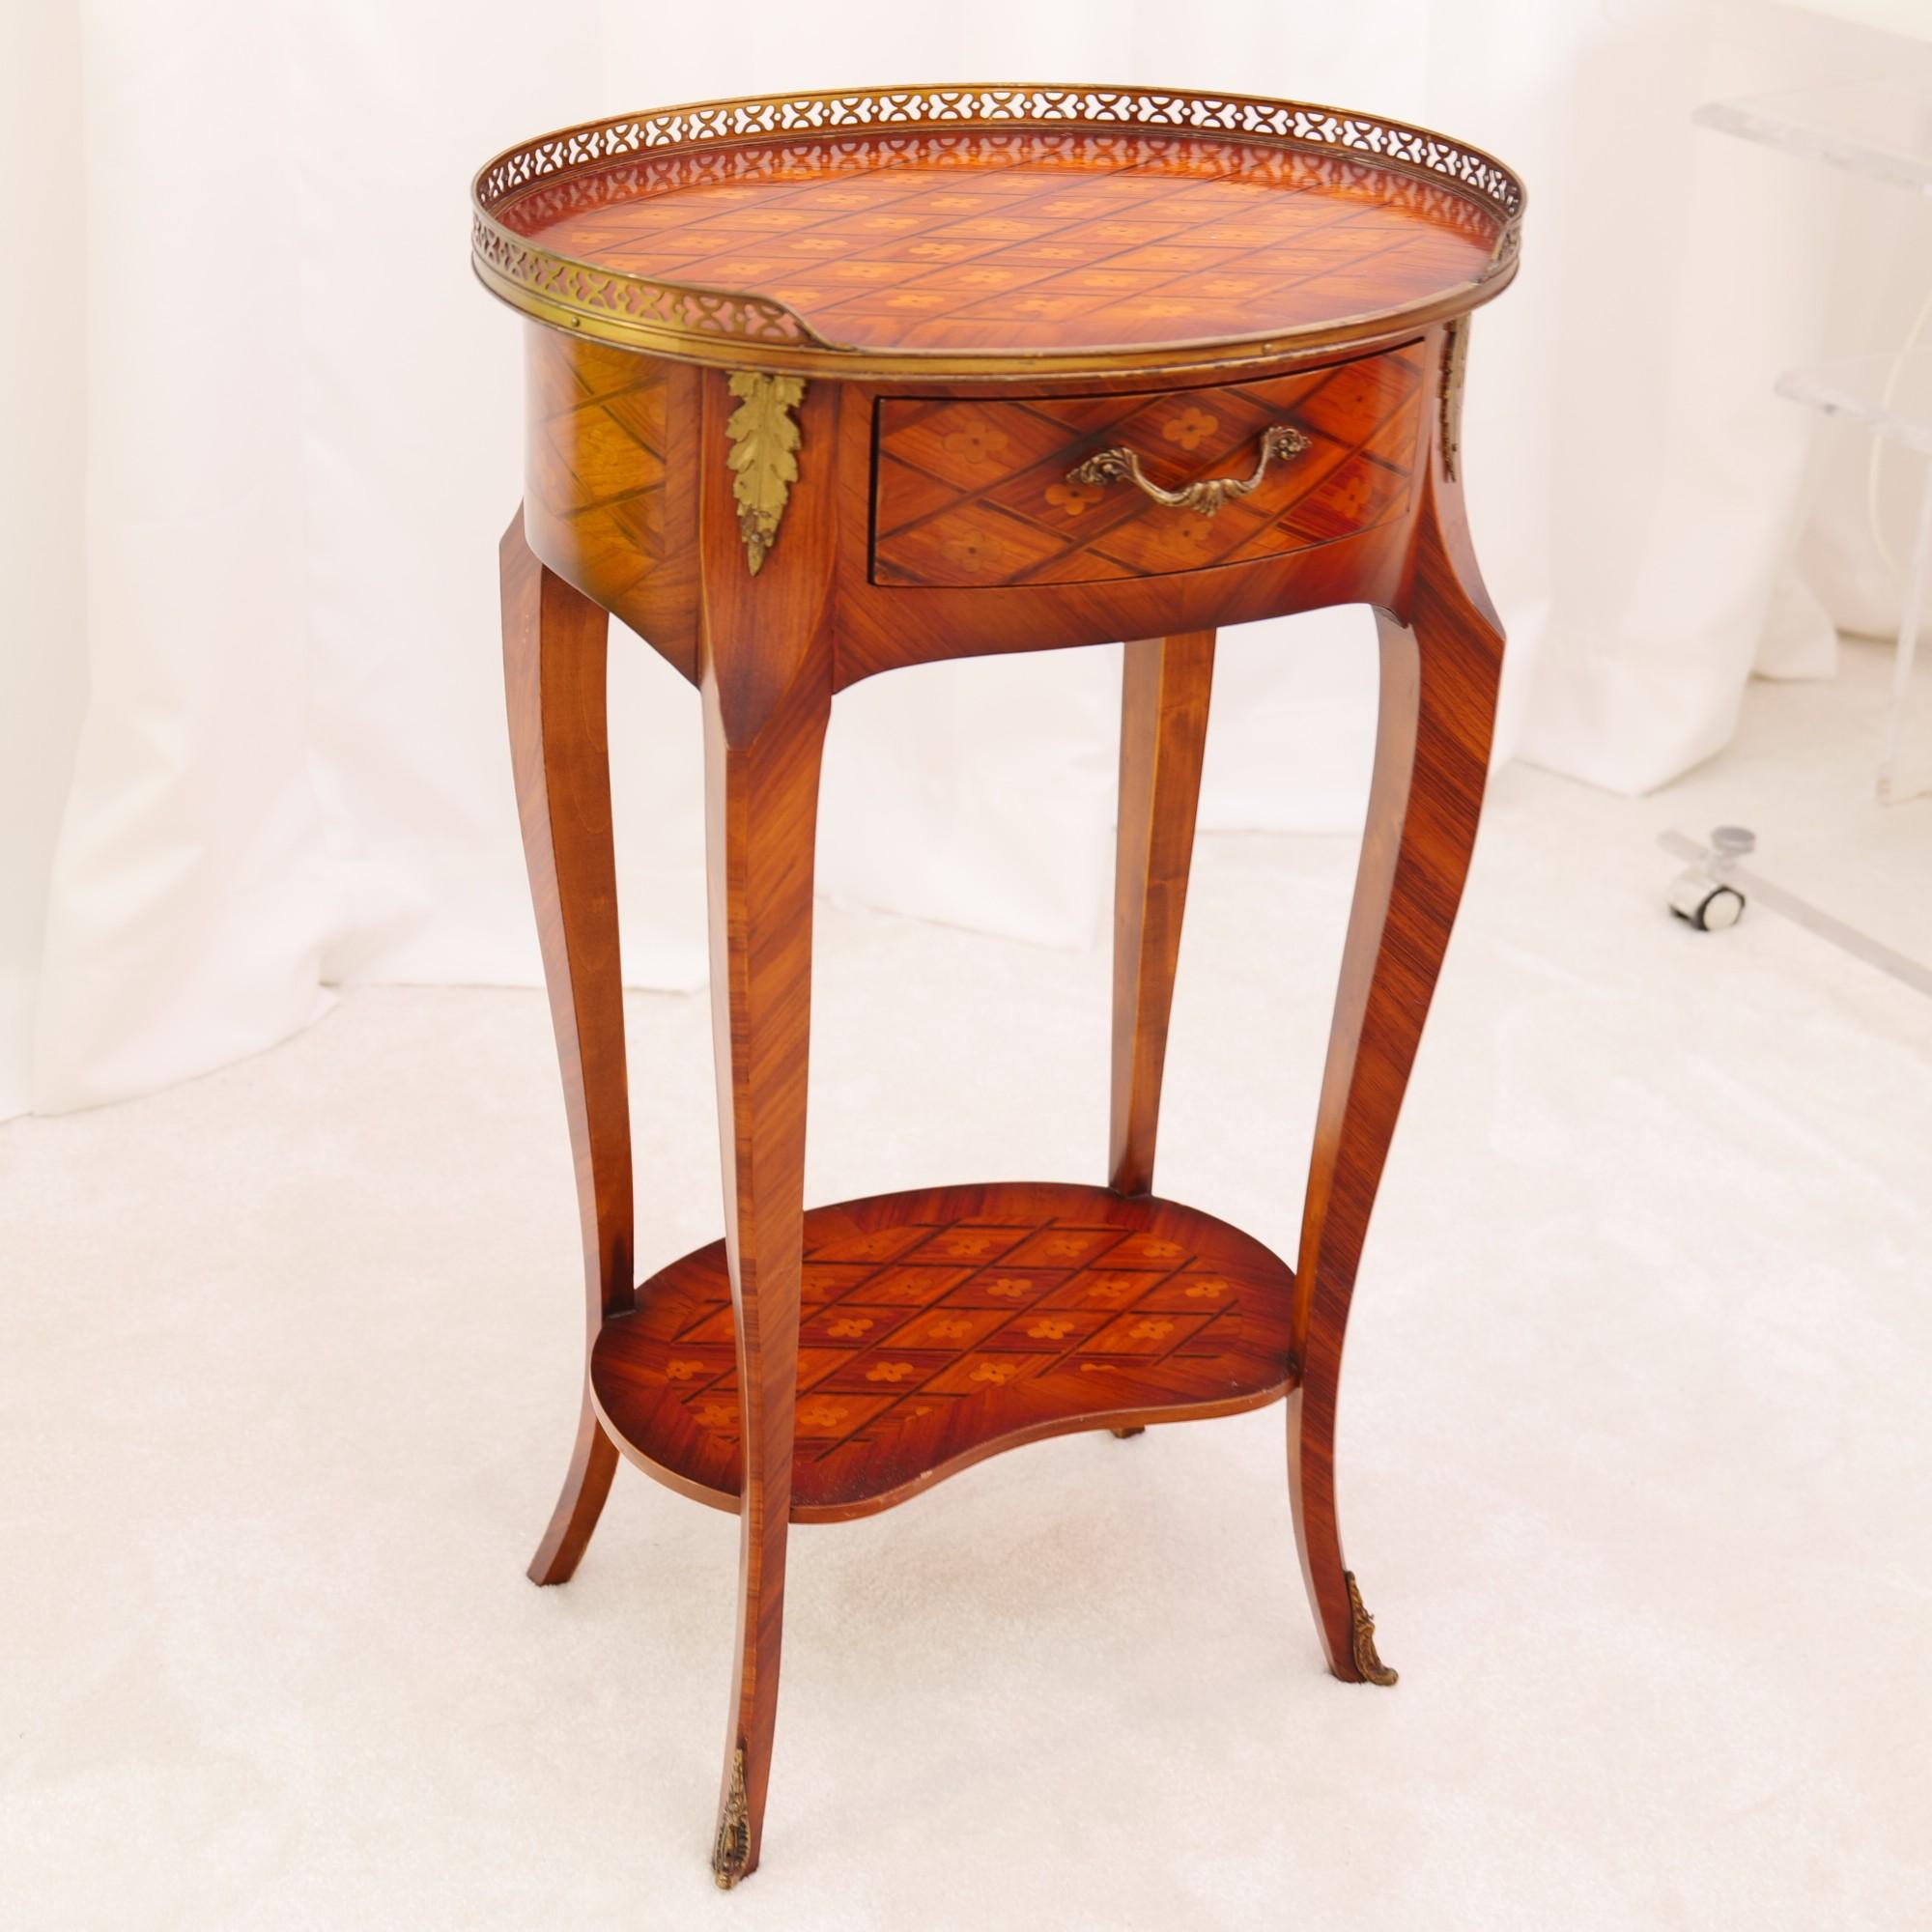 Vintage french side tables in style of Louis XV
 good condition with slight signs of use and patina 2 small spots on the rosewood.
approx - 1960s - France